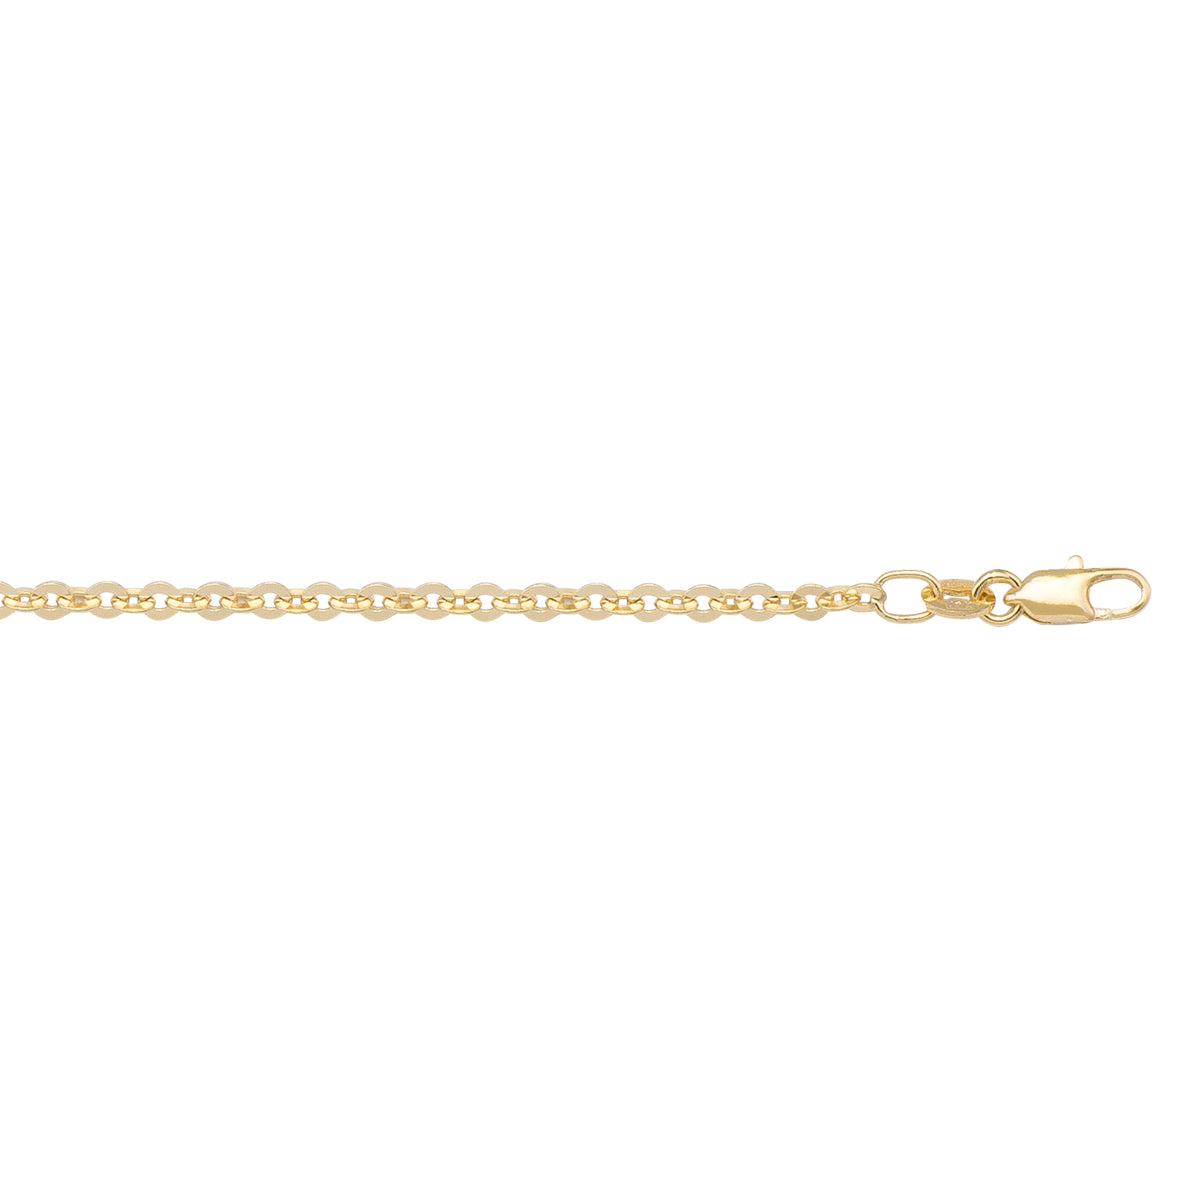 CHAINS YELLOW GOLD SOLID CABLE LINK 